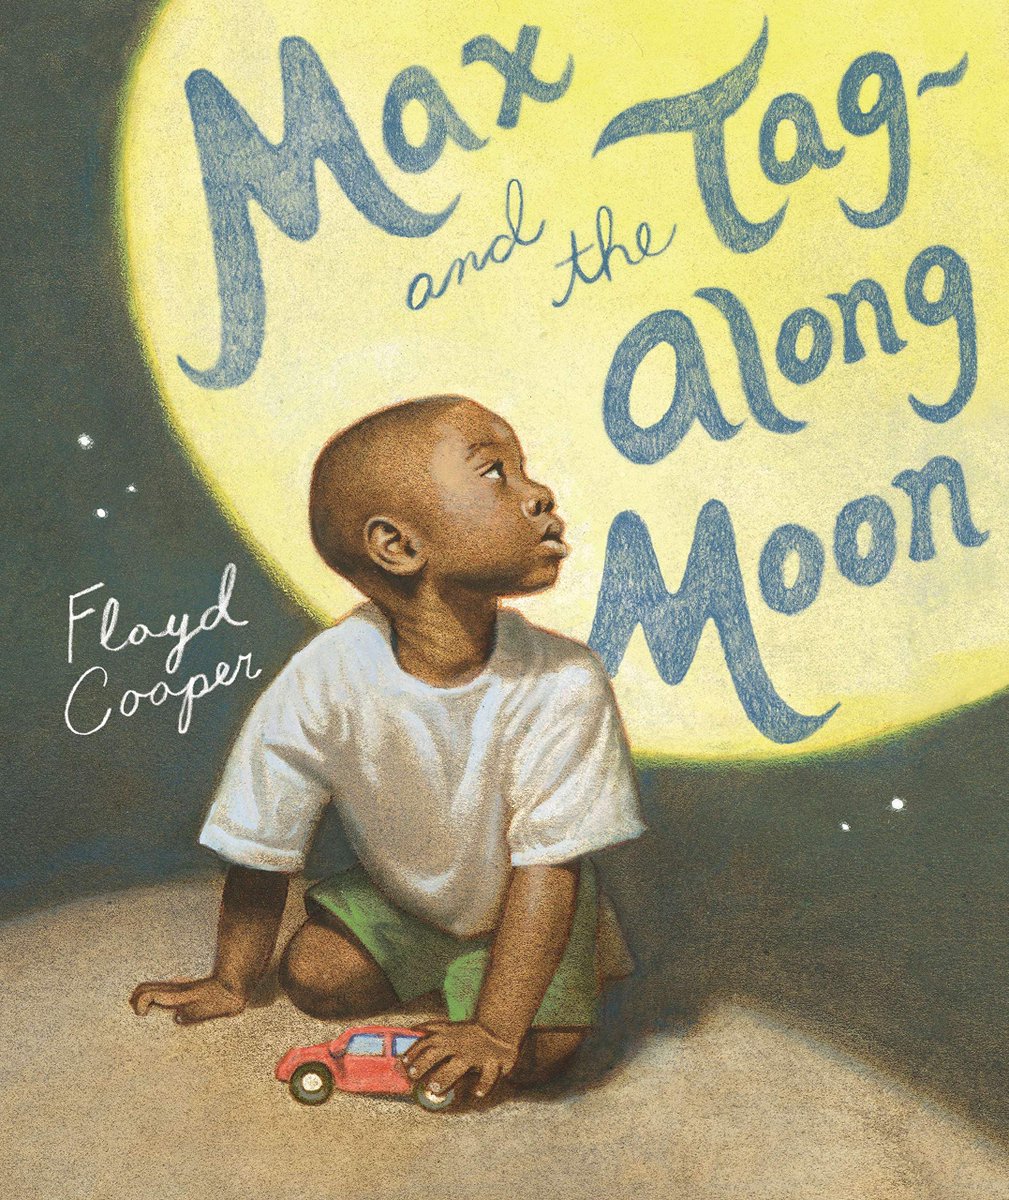 Want a touching story about the magical bond between grandparent & grandchild? Or how about one that delights in a child's imagination as to the power of the moon? Then here's a book written and illustrated by  @floydcooper4 that depicts both ideas in one heart-warming story!